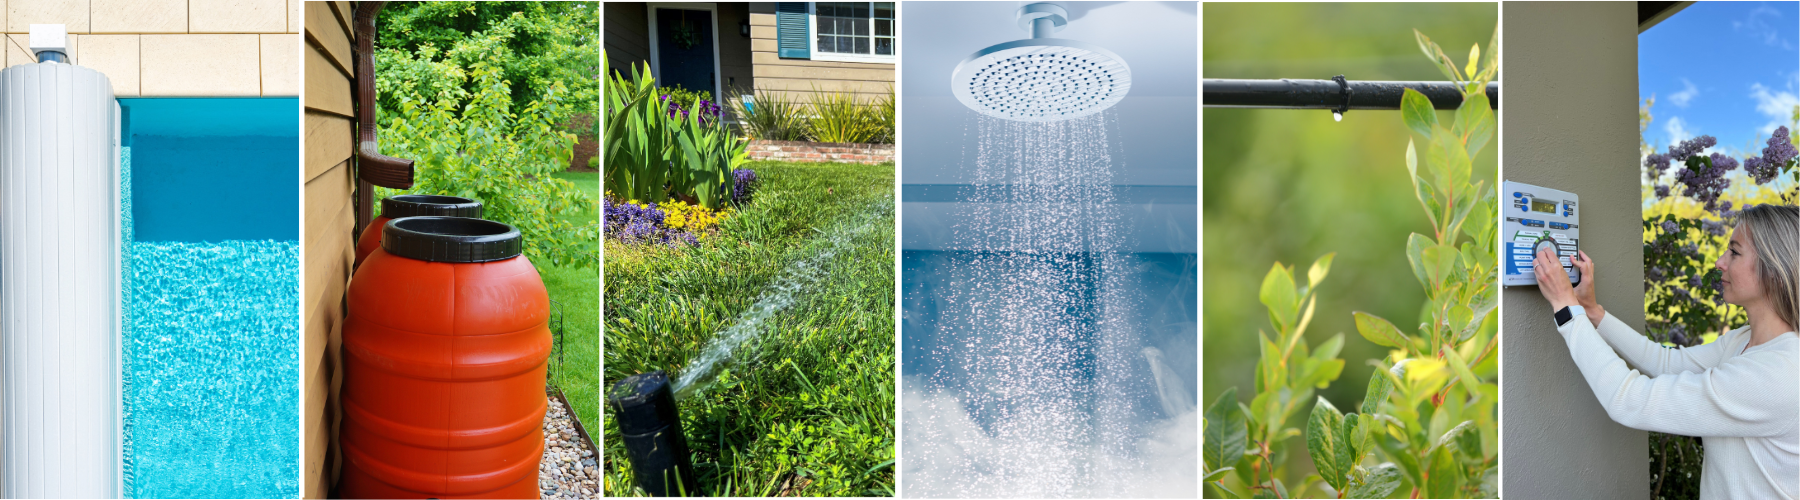 Six images showing, from left, a pool cover, rain barrel, lawn sprinkler, shower head, drip irrigation and irrigation controller.